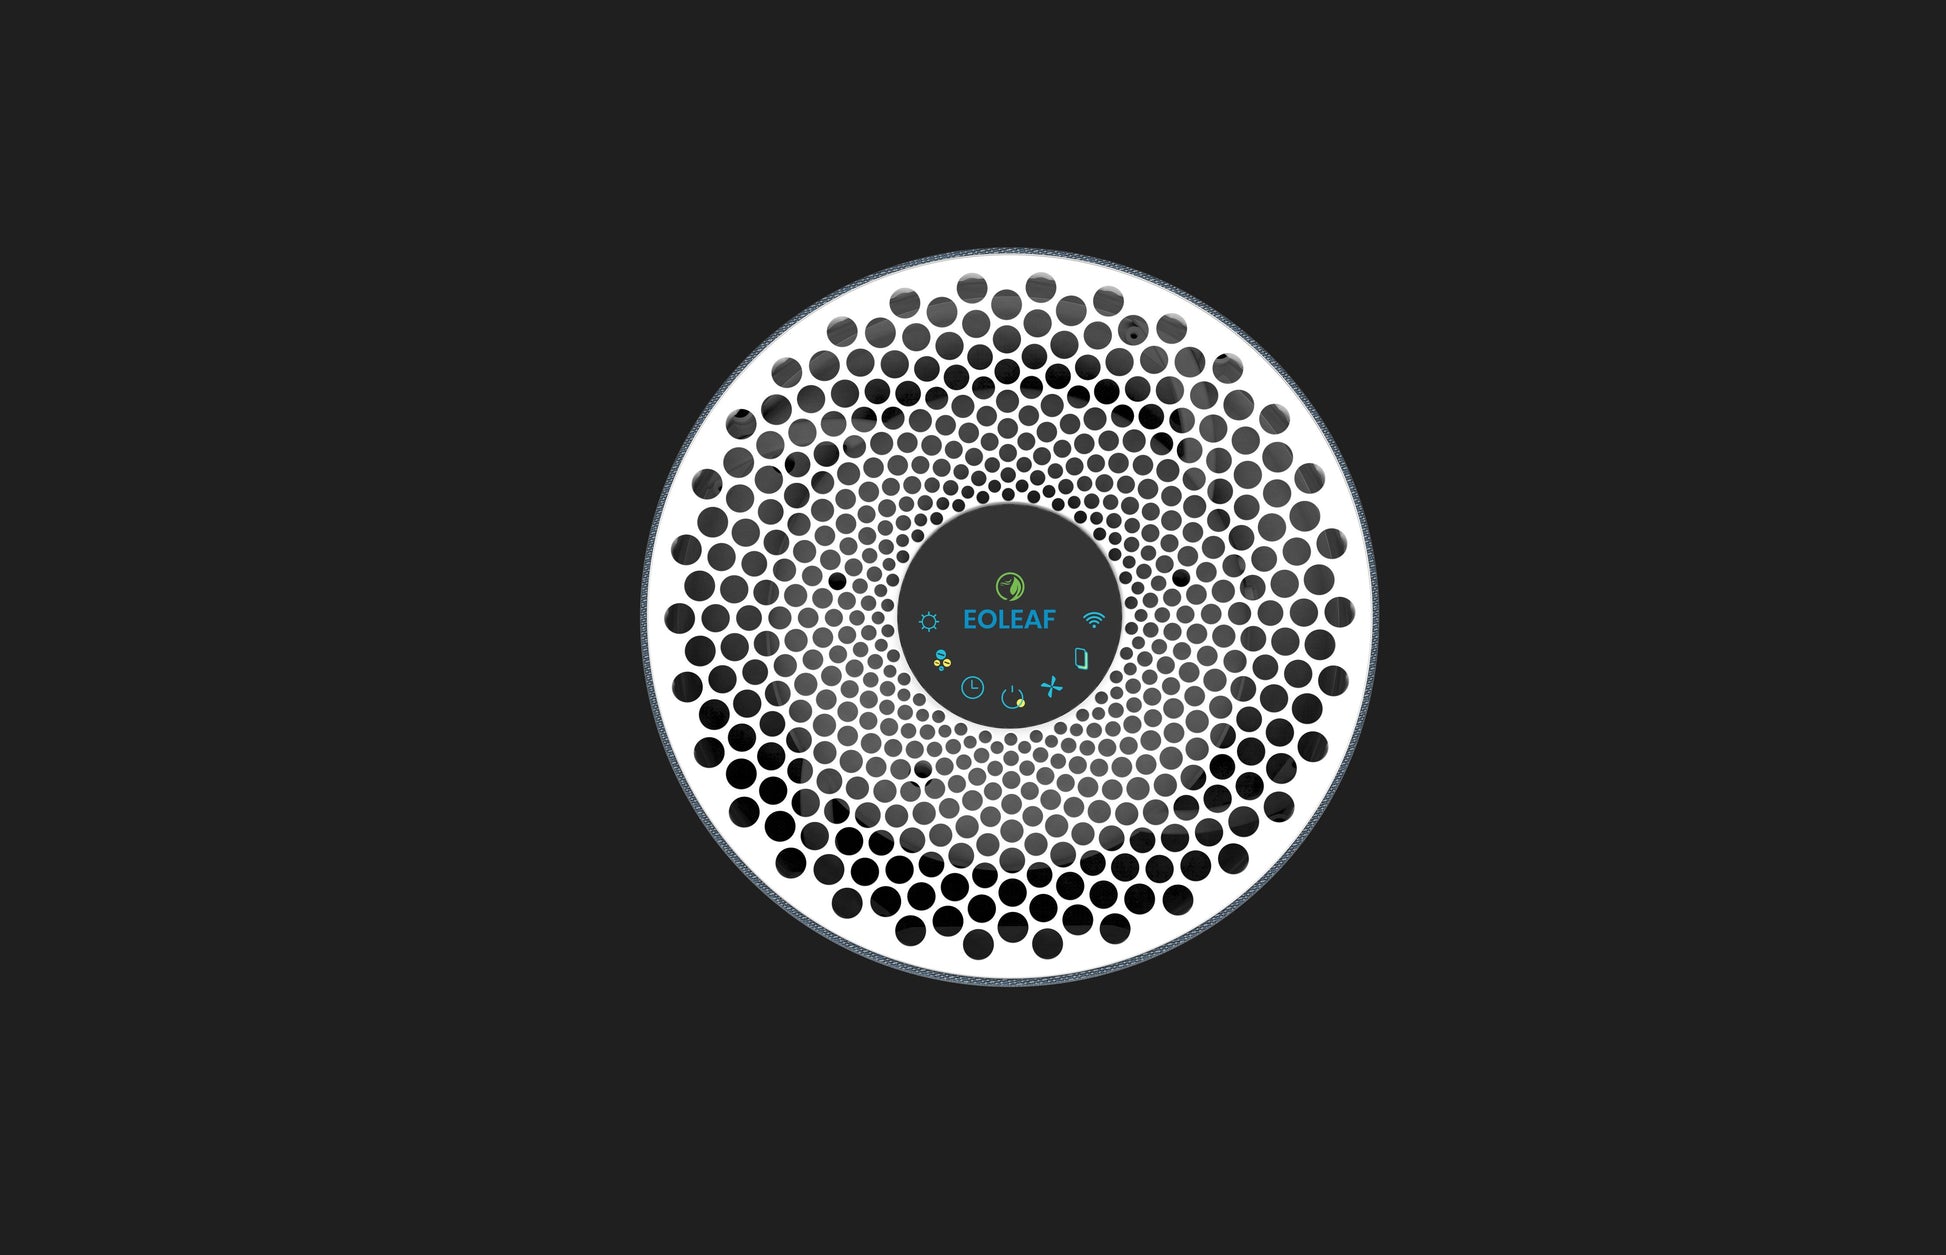 Top view of the Eoleaf Pure 500 air purifier